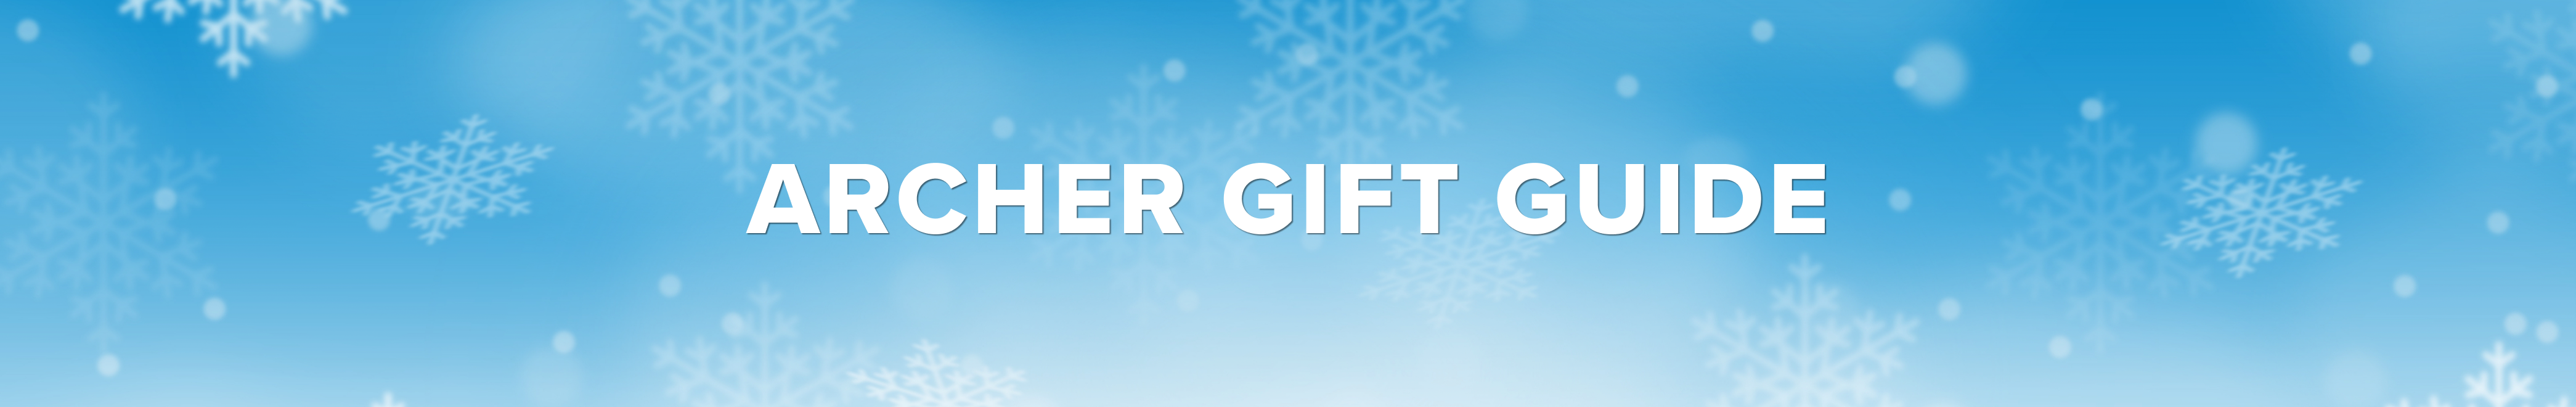 Archer Holiday Gift Guide banner